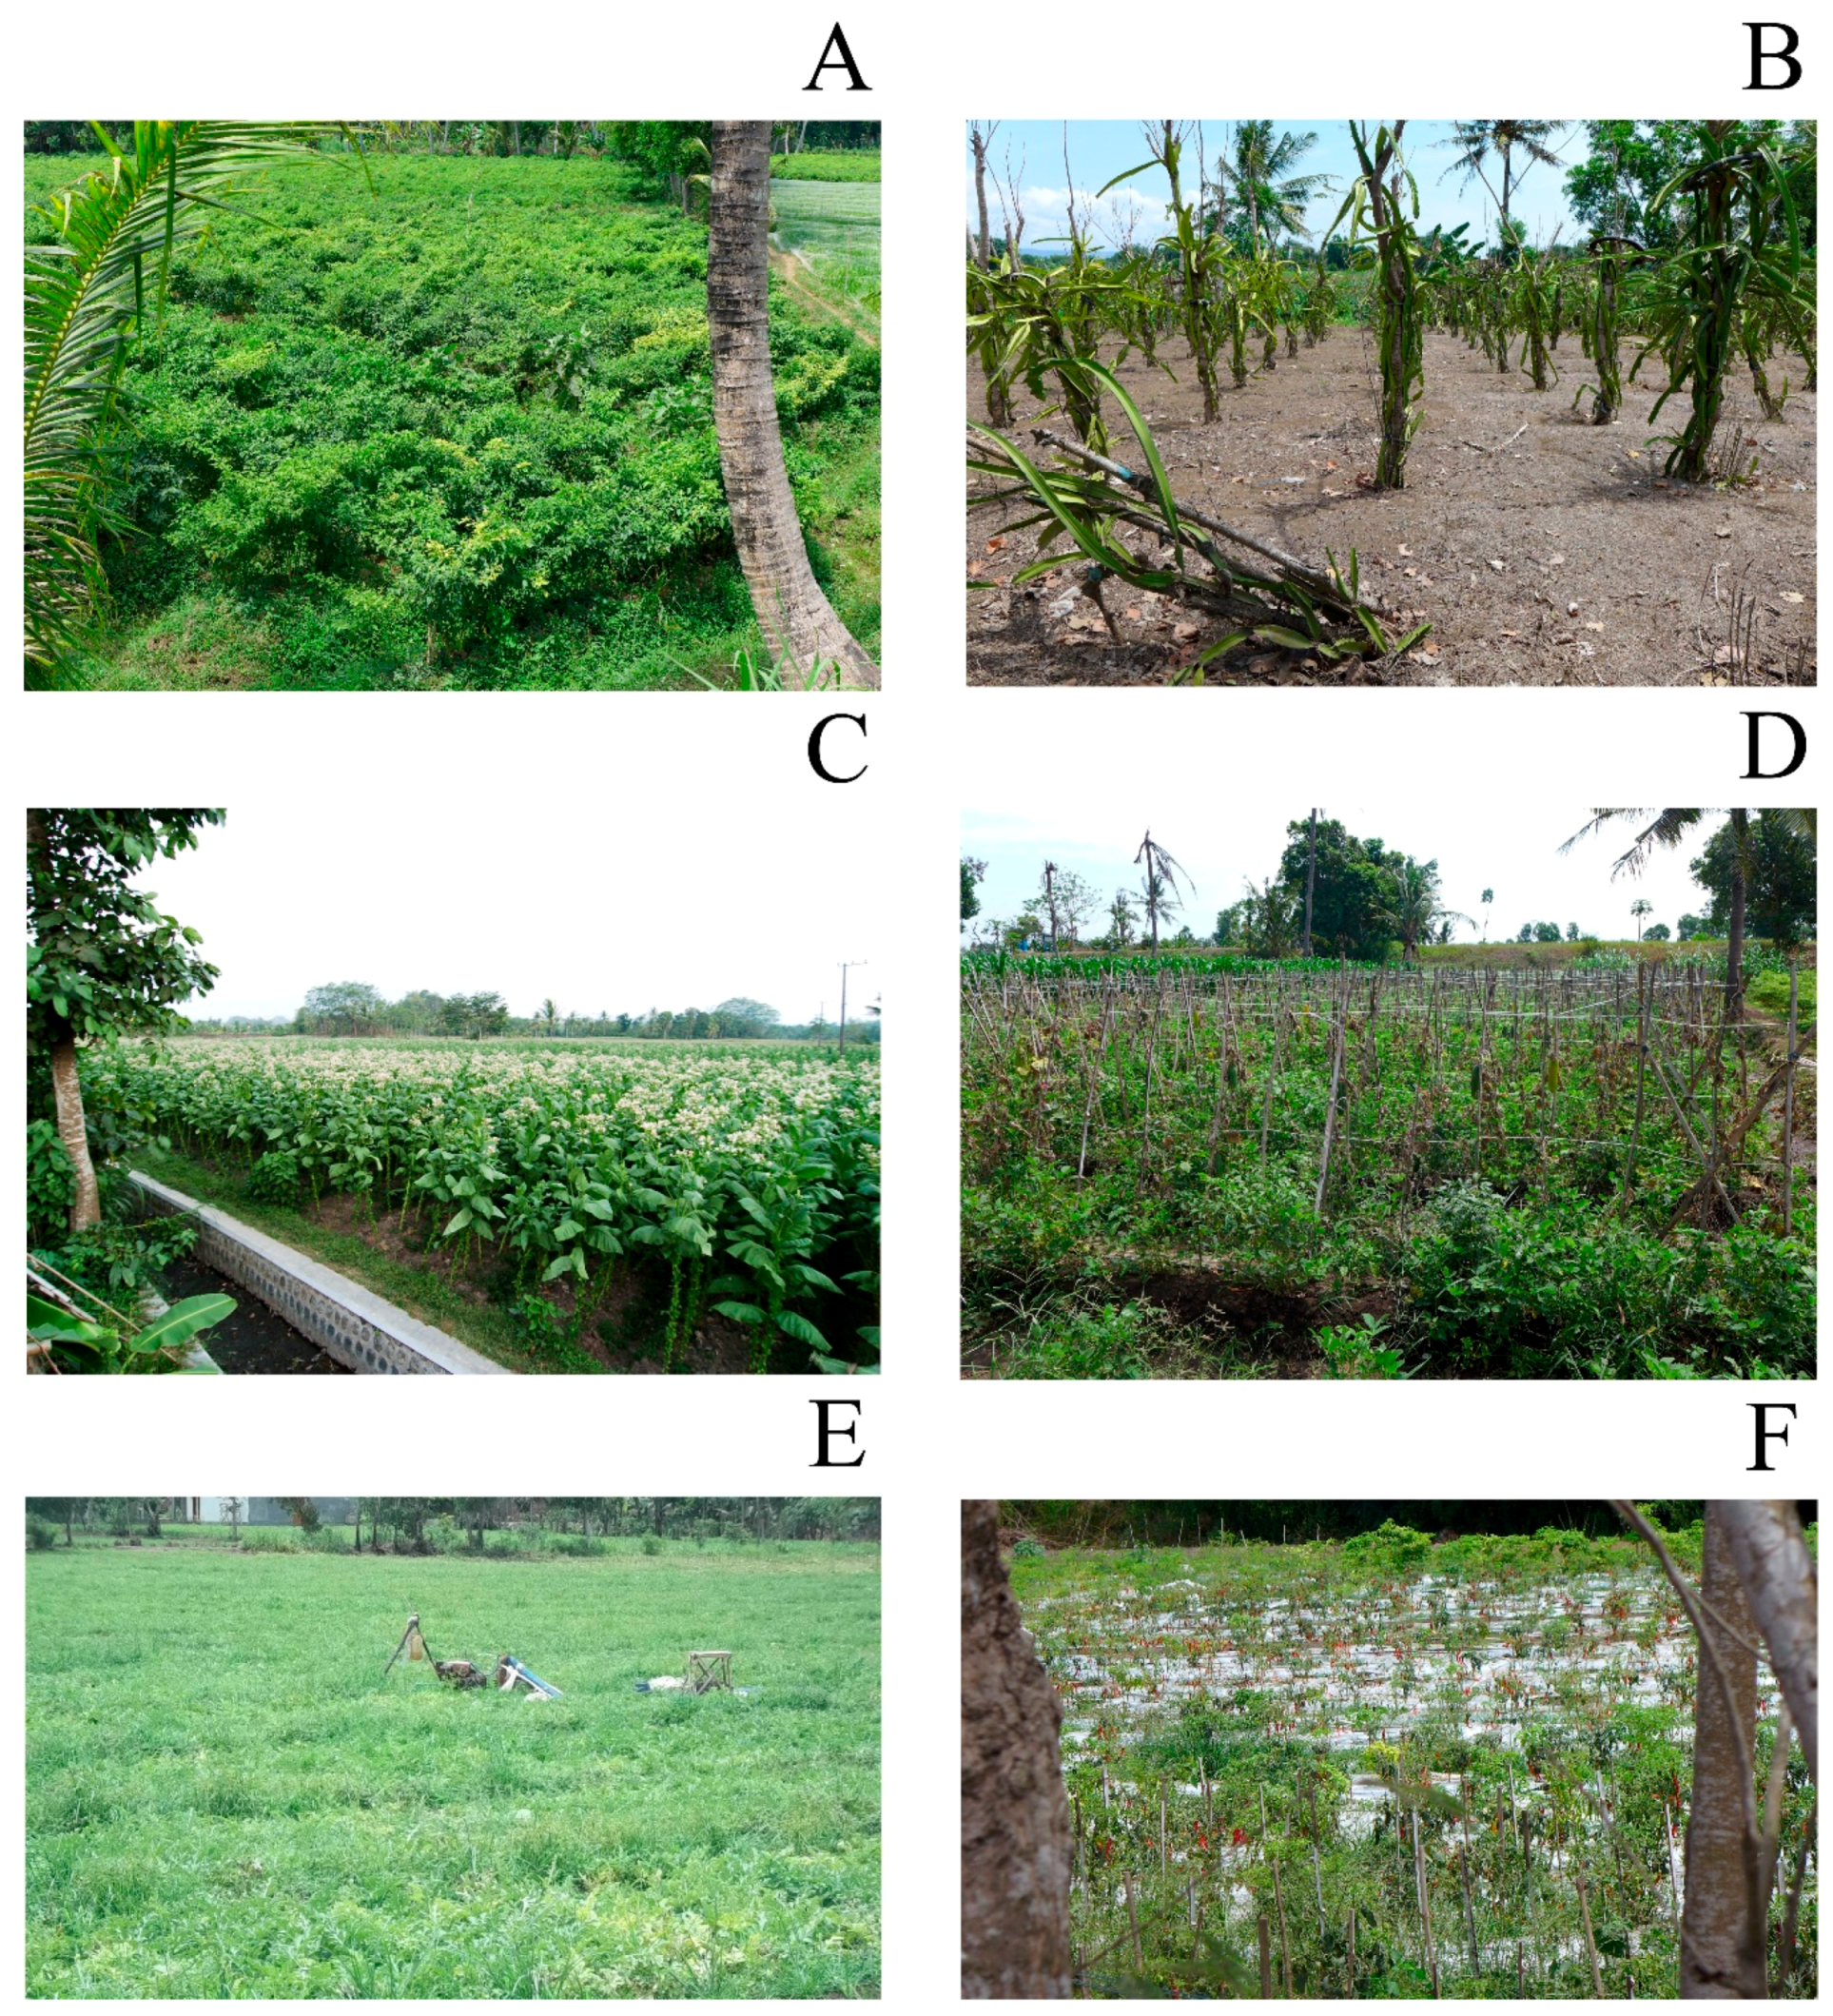 Land | Free Full-Text | Agricultural Land Conversion, Land Economic Value,  and Sustainable Agriculture: A Case Study in East Java, Indonesia